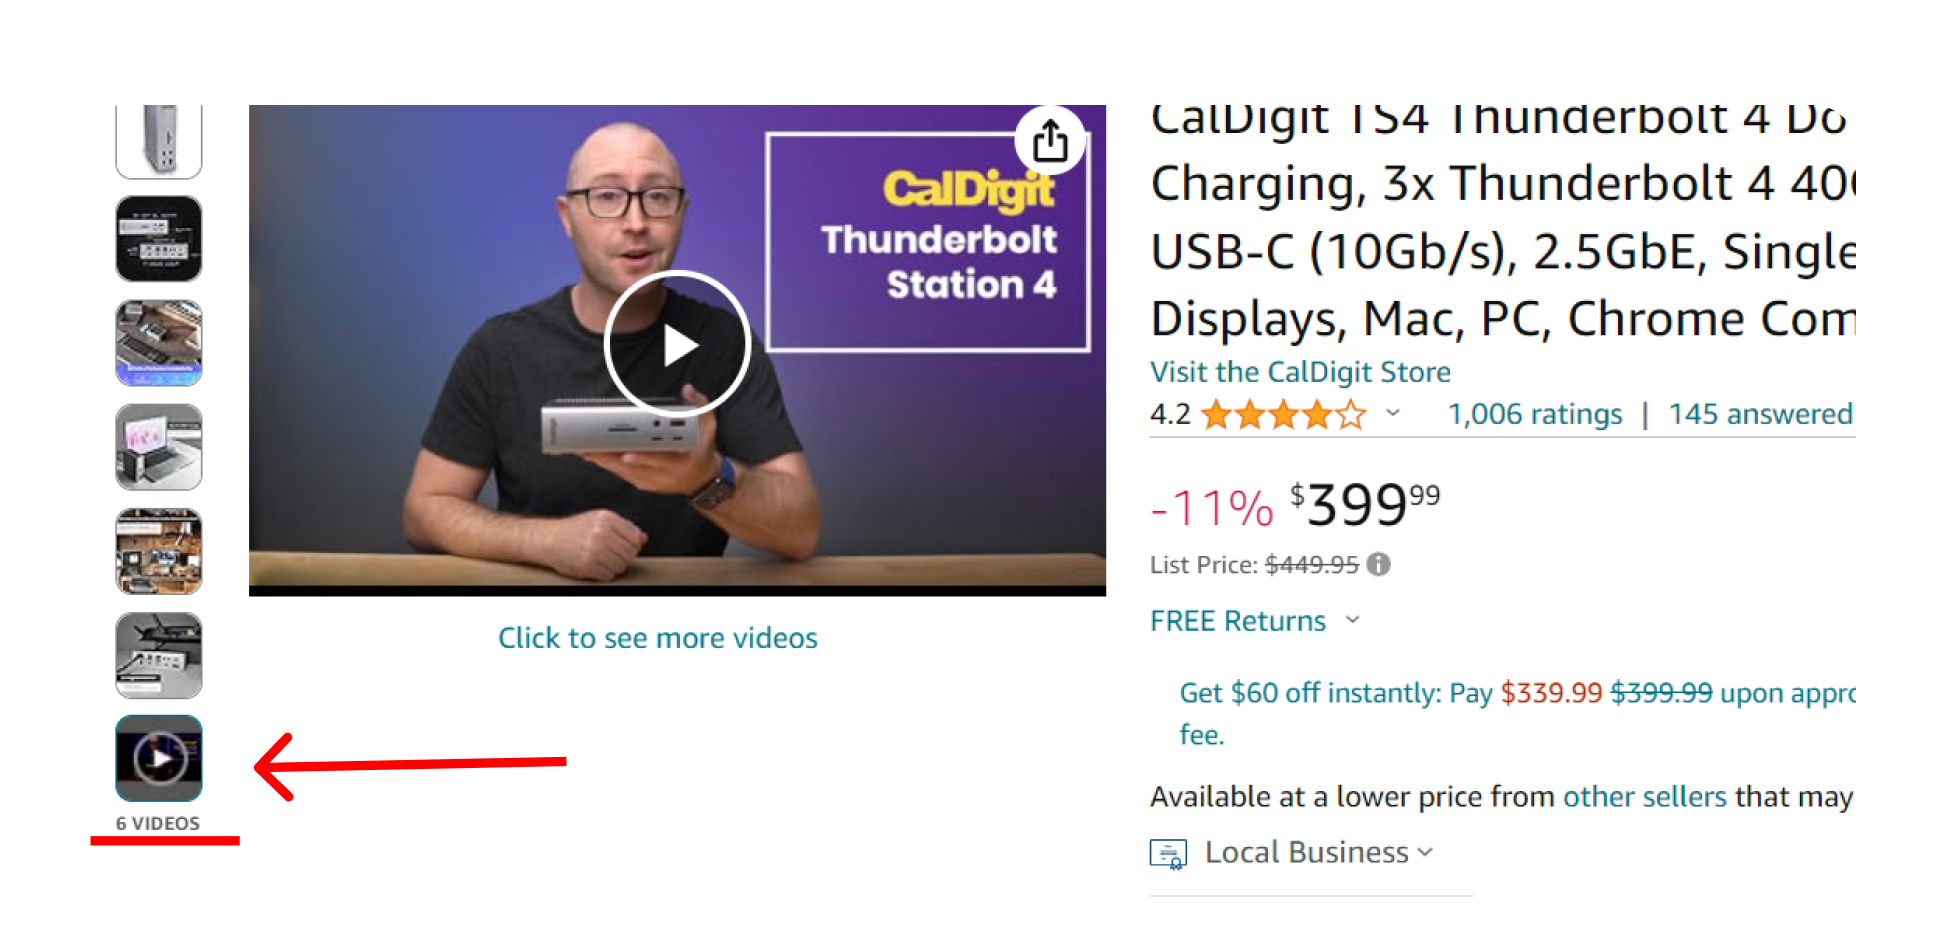 Amazon product details page with the video button that opens the Amazon top video carousel marked in red